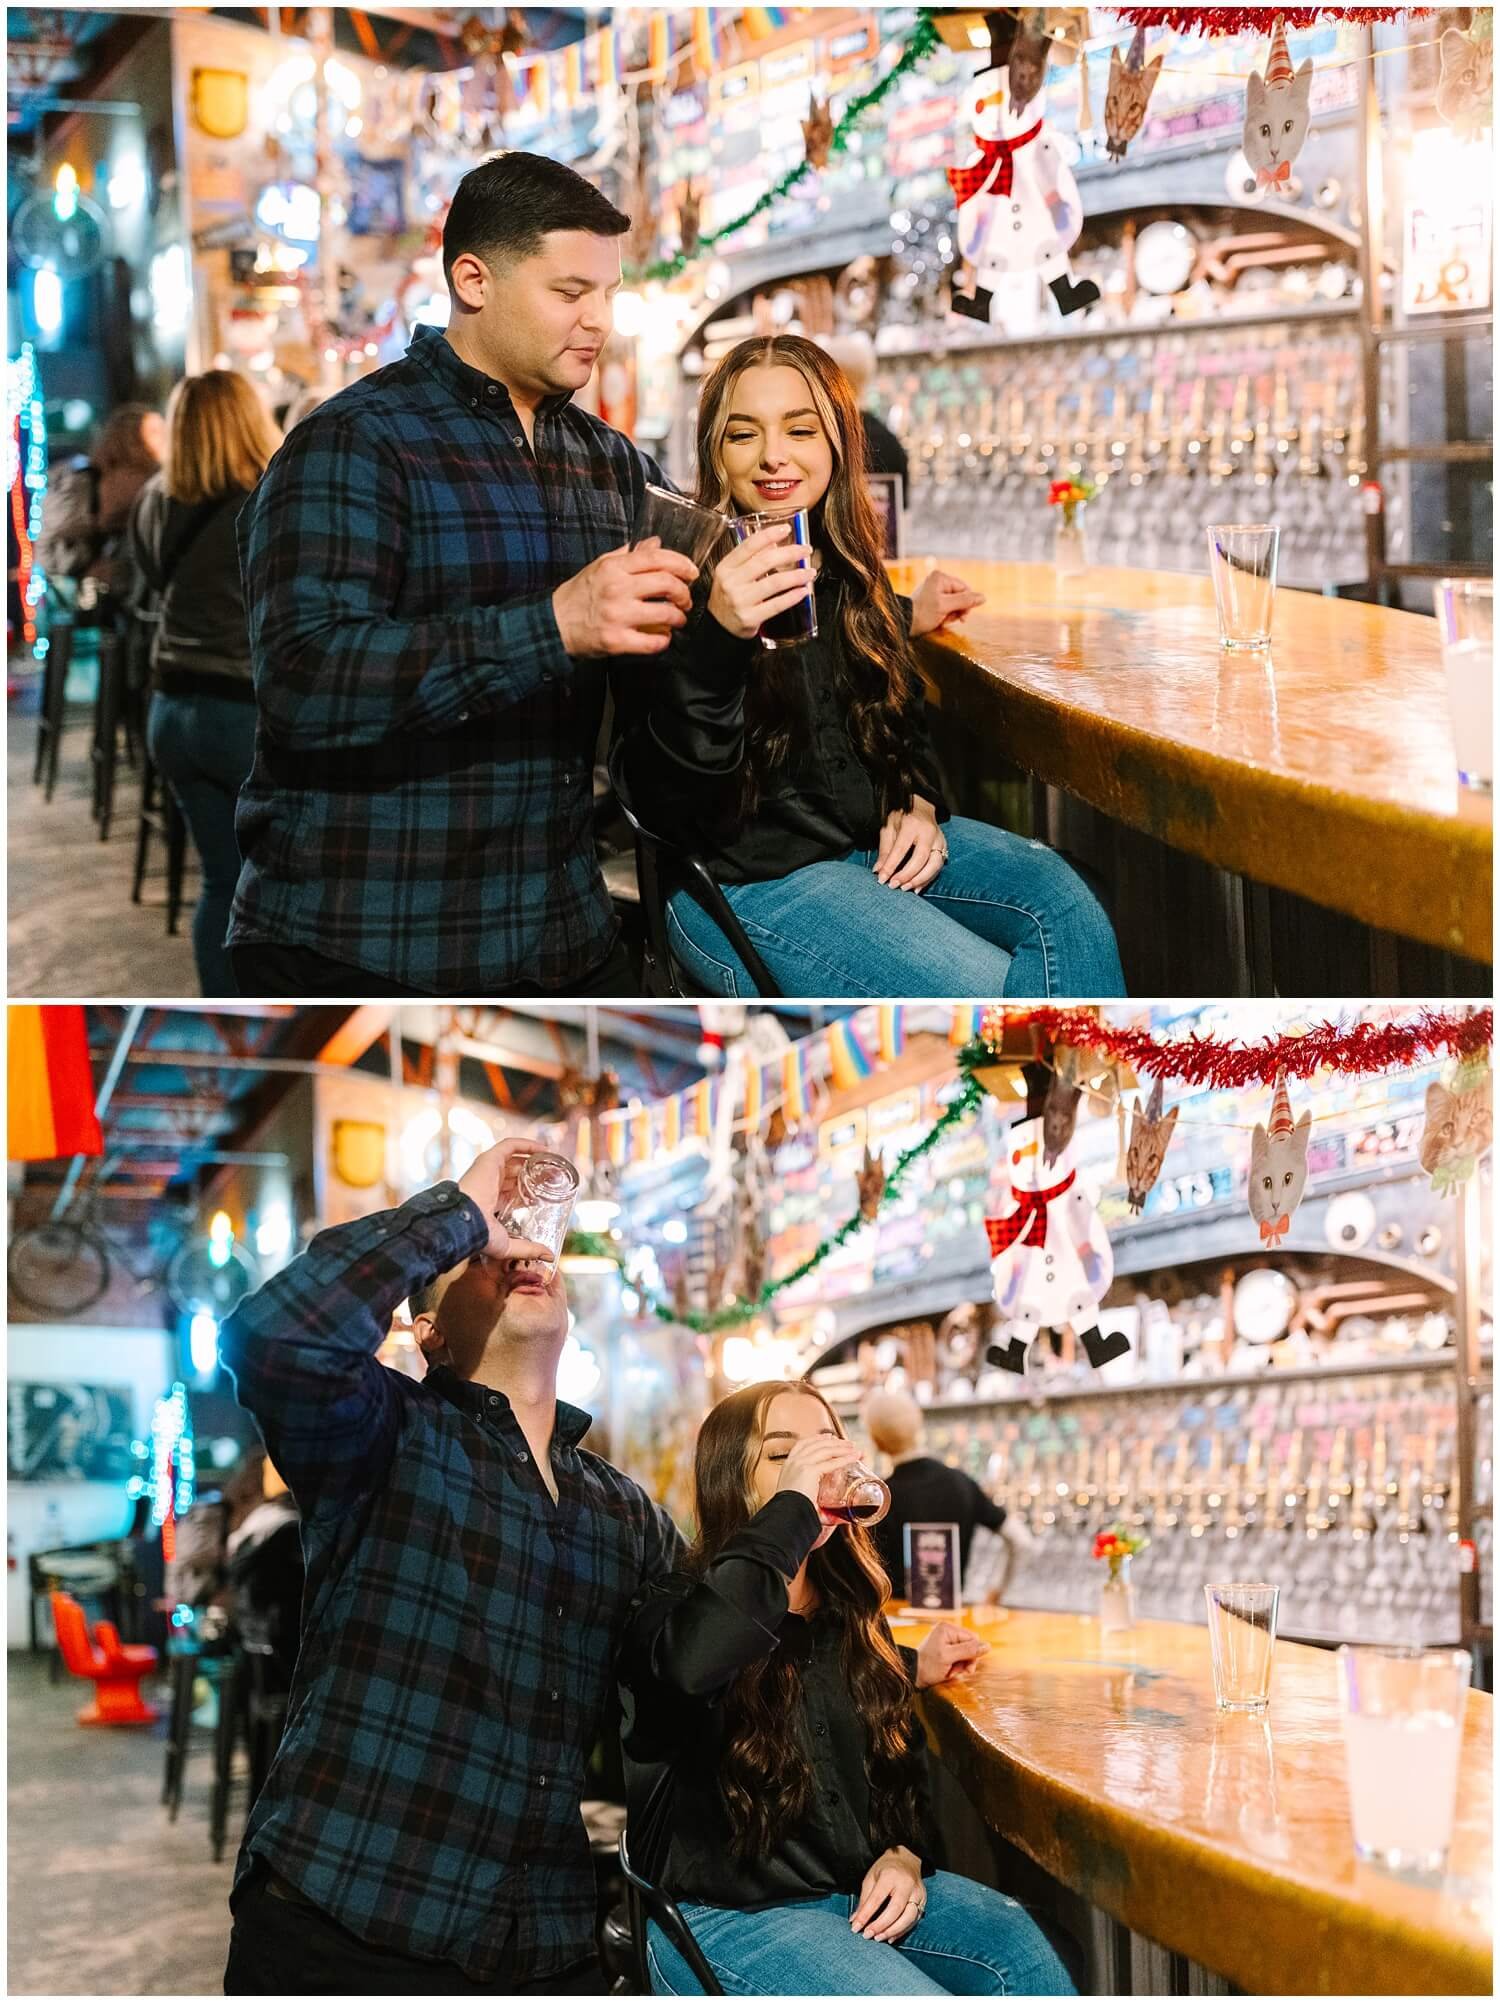 Couple drinks beer at Goldsteins Fresno - image by GunnShot Photography